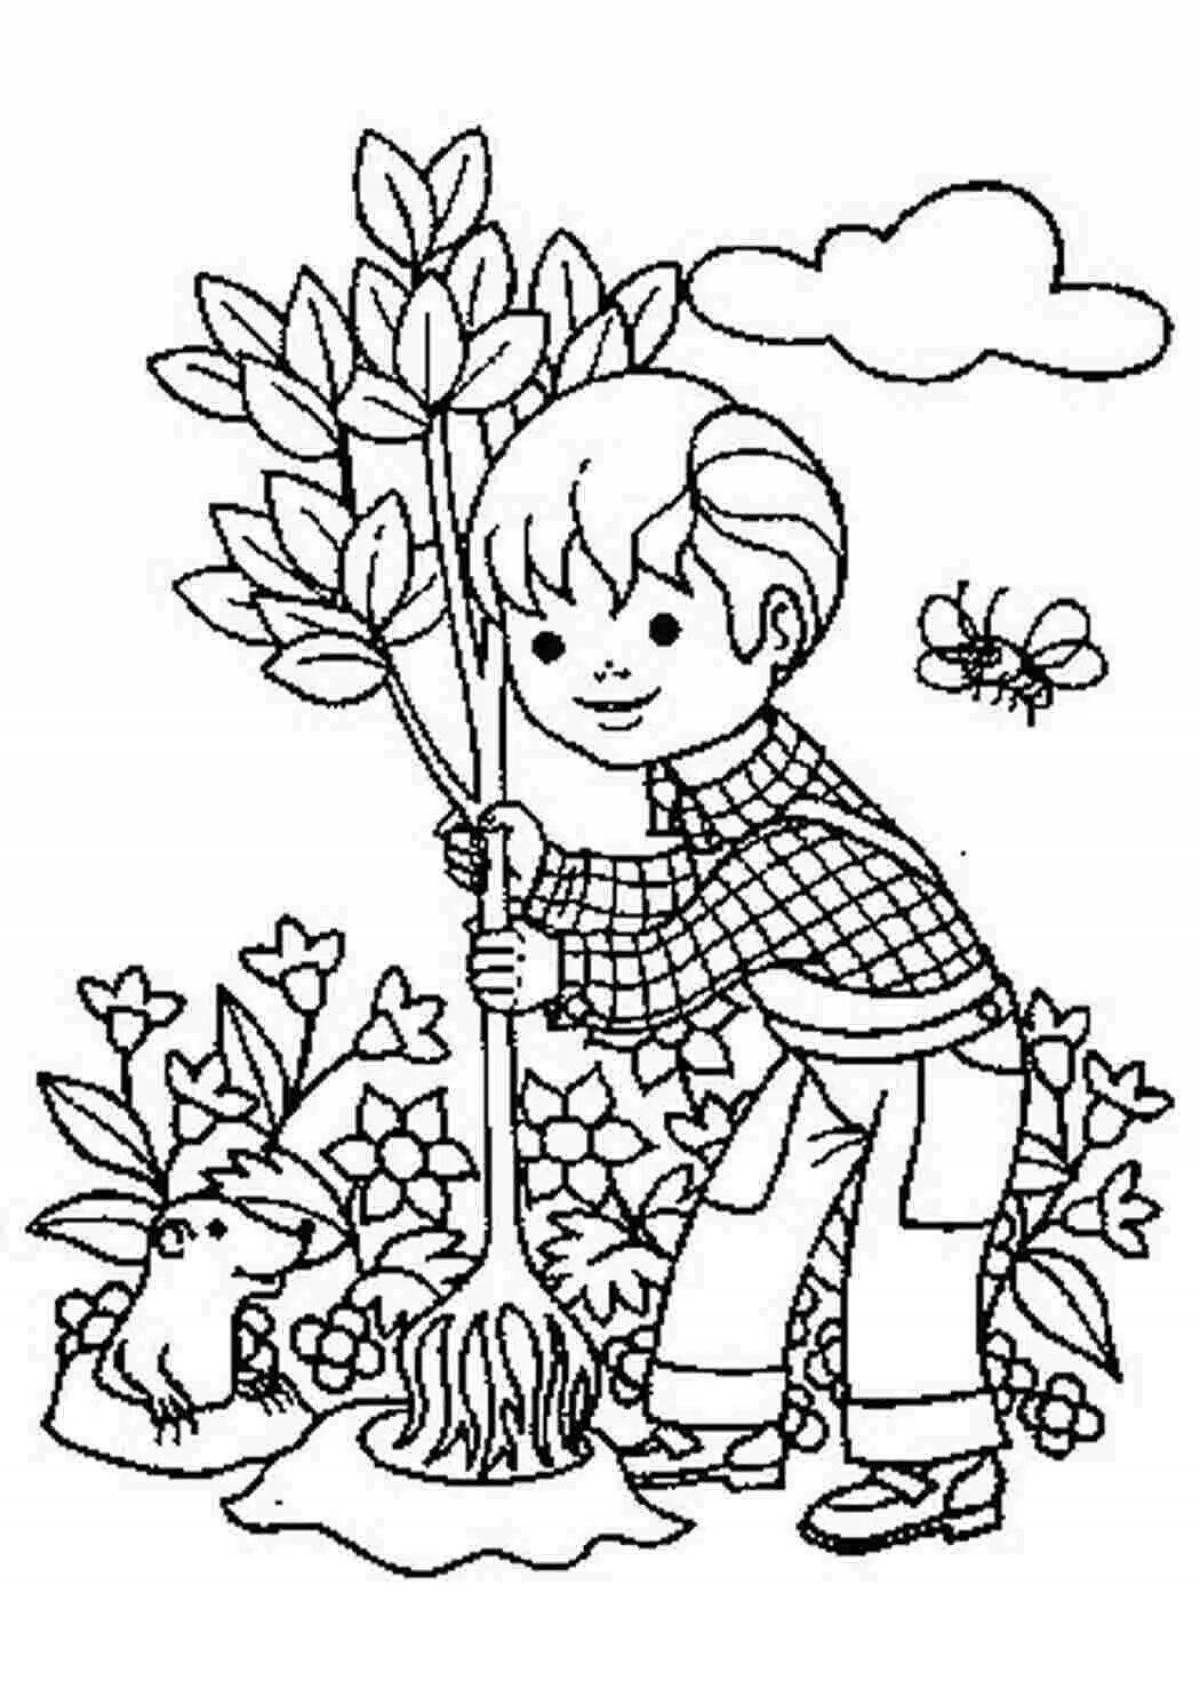 Joyful caring for nature coloring book for preschoolers on ecology